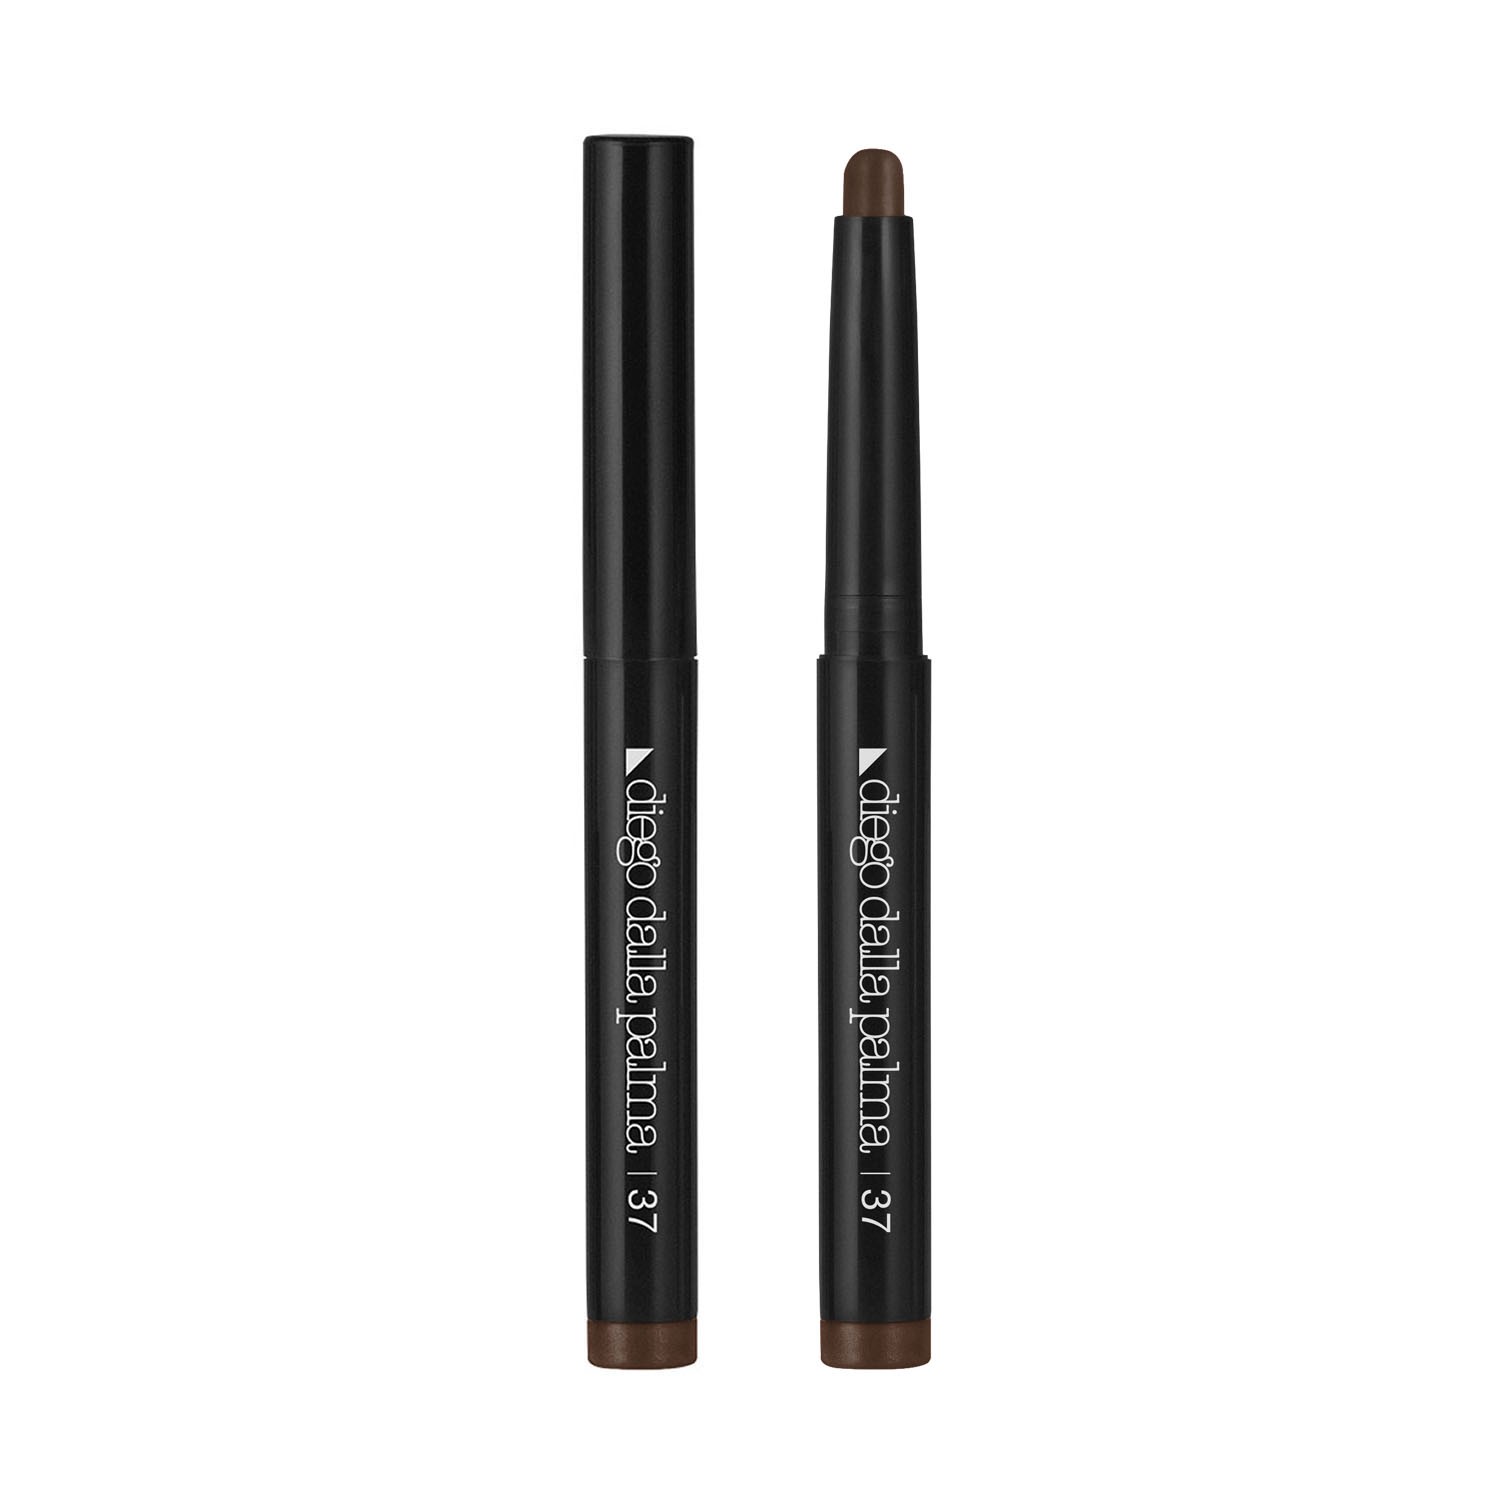 Image of Diego Dalla Palma Deep Earth Eyeshadow Ombretto In Stick 1,6g